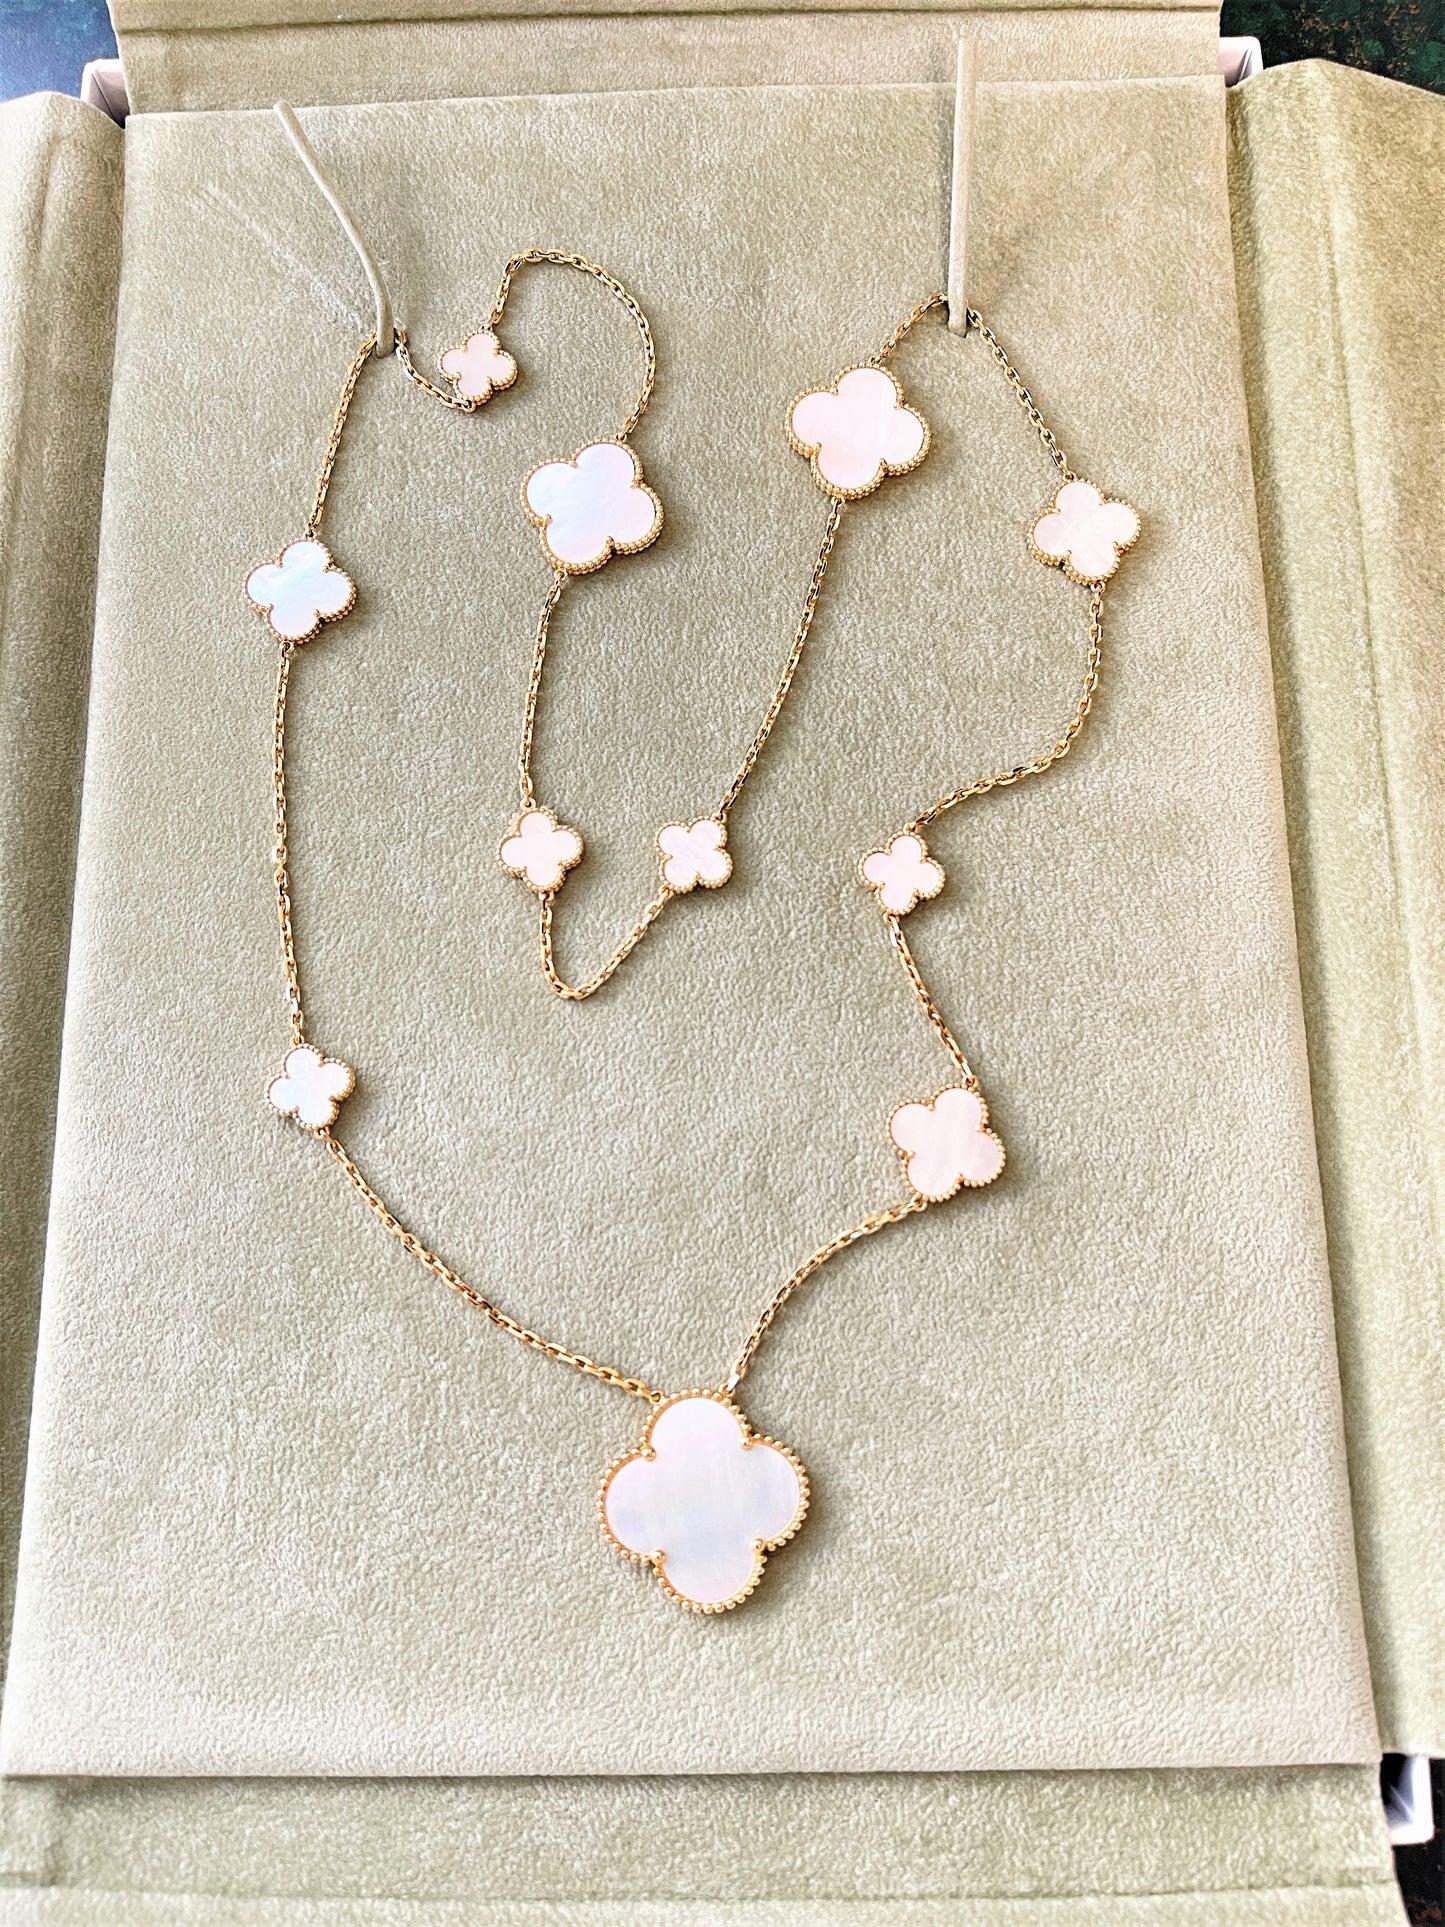 
Van Cleef & Arpels MOP Magic Alhambra Necklace In 18k yellow gold. Magic Alhambra plays with proportion, mixing and matching larger and smaller quatrefoils,
The necklace consist of 11 clover motifs of various sizes, set with white mother of pearl